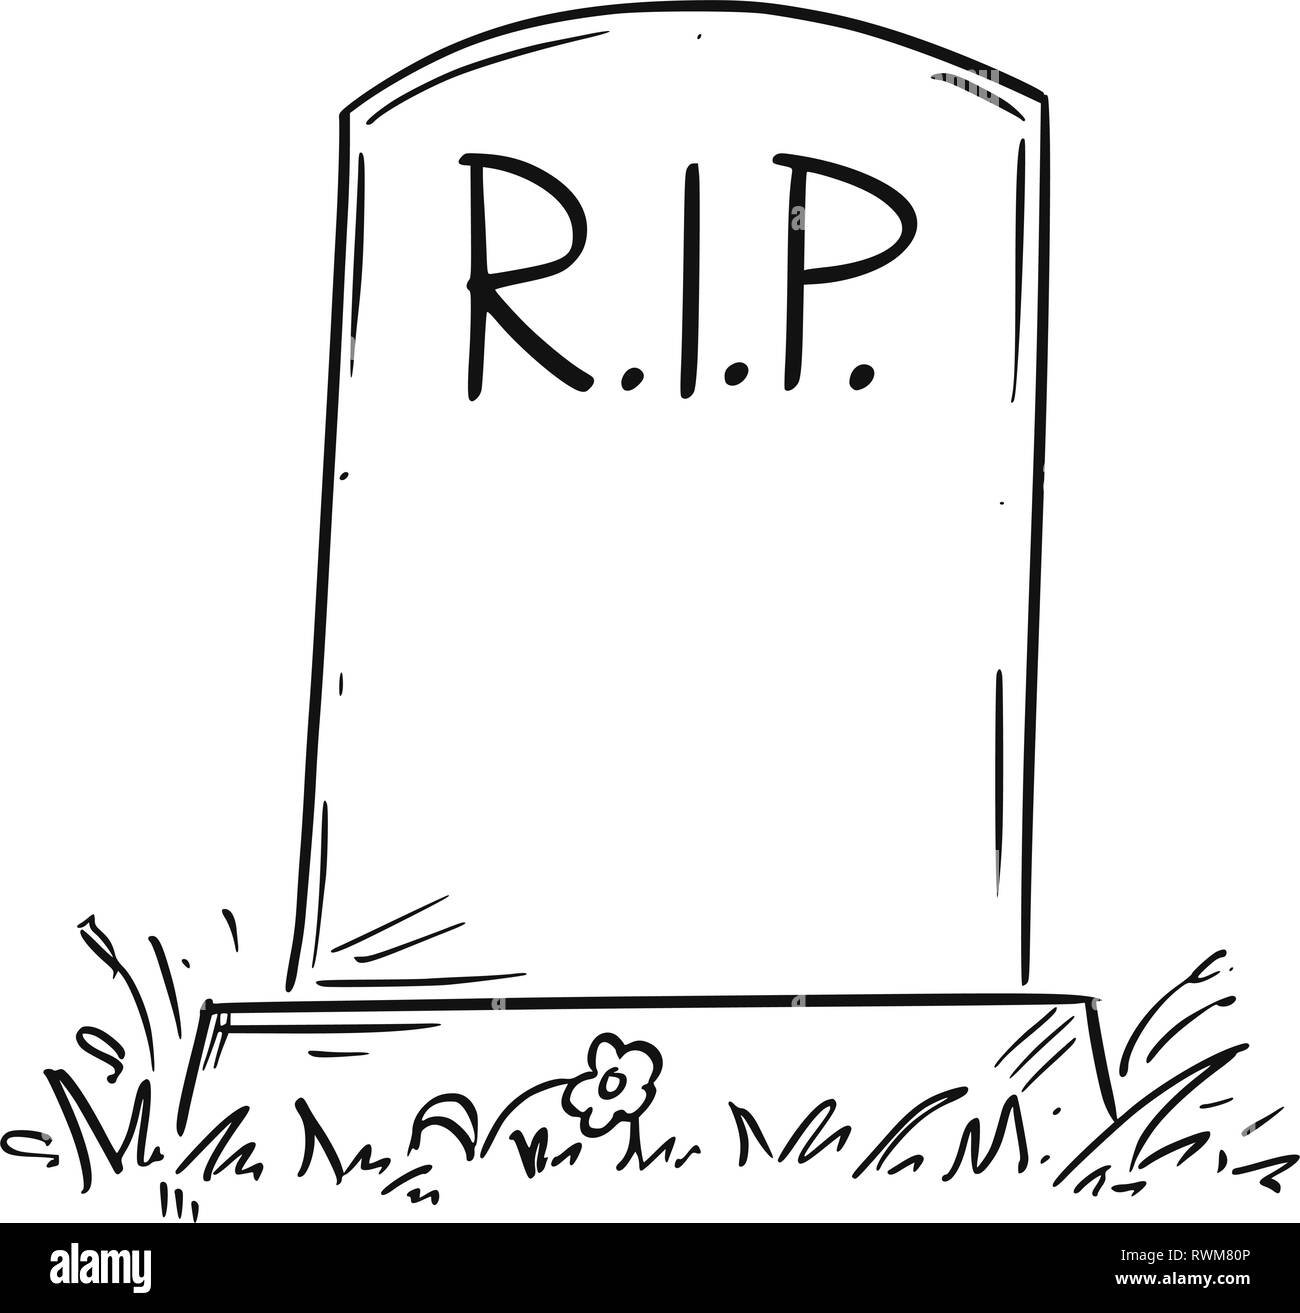 Cartoon Drawing of Tombstone With RIP or Rest in Peace Text Stock Vector